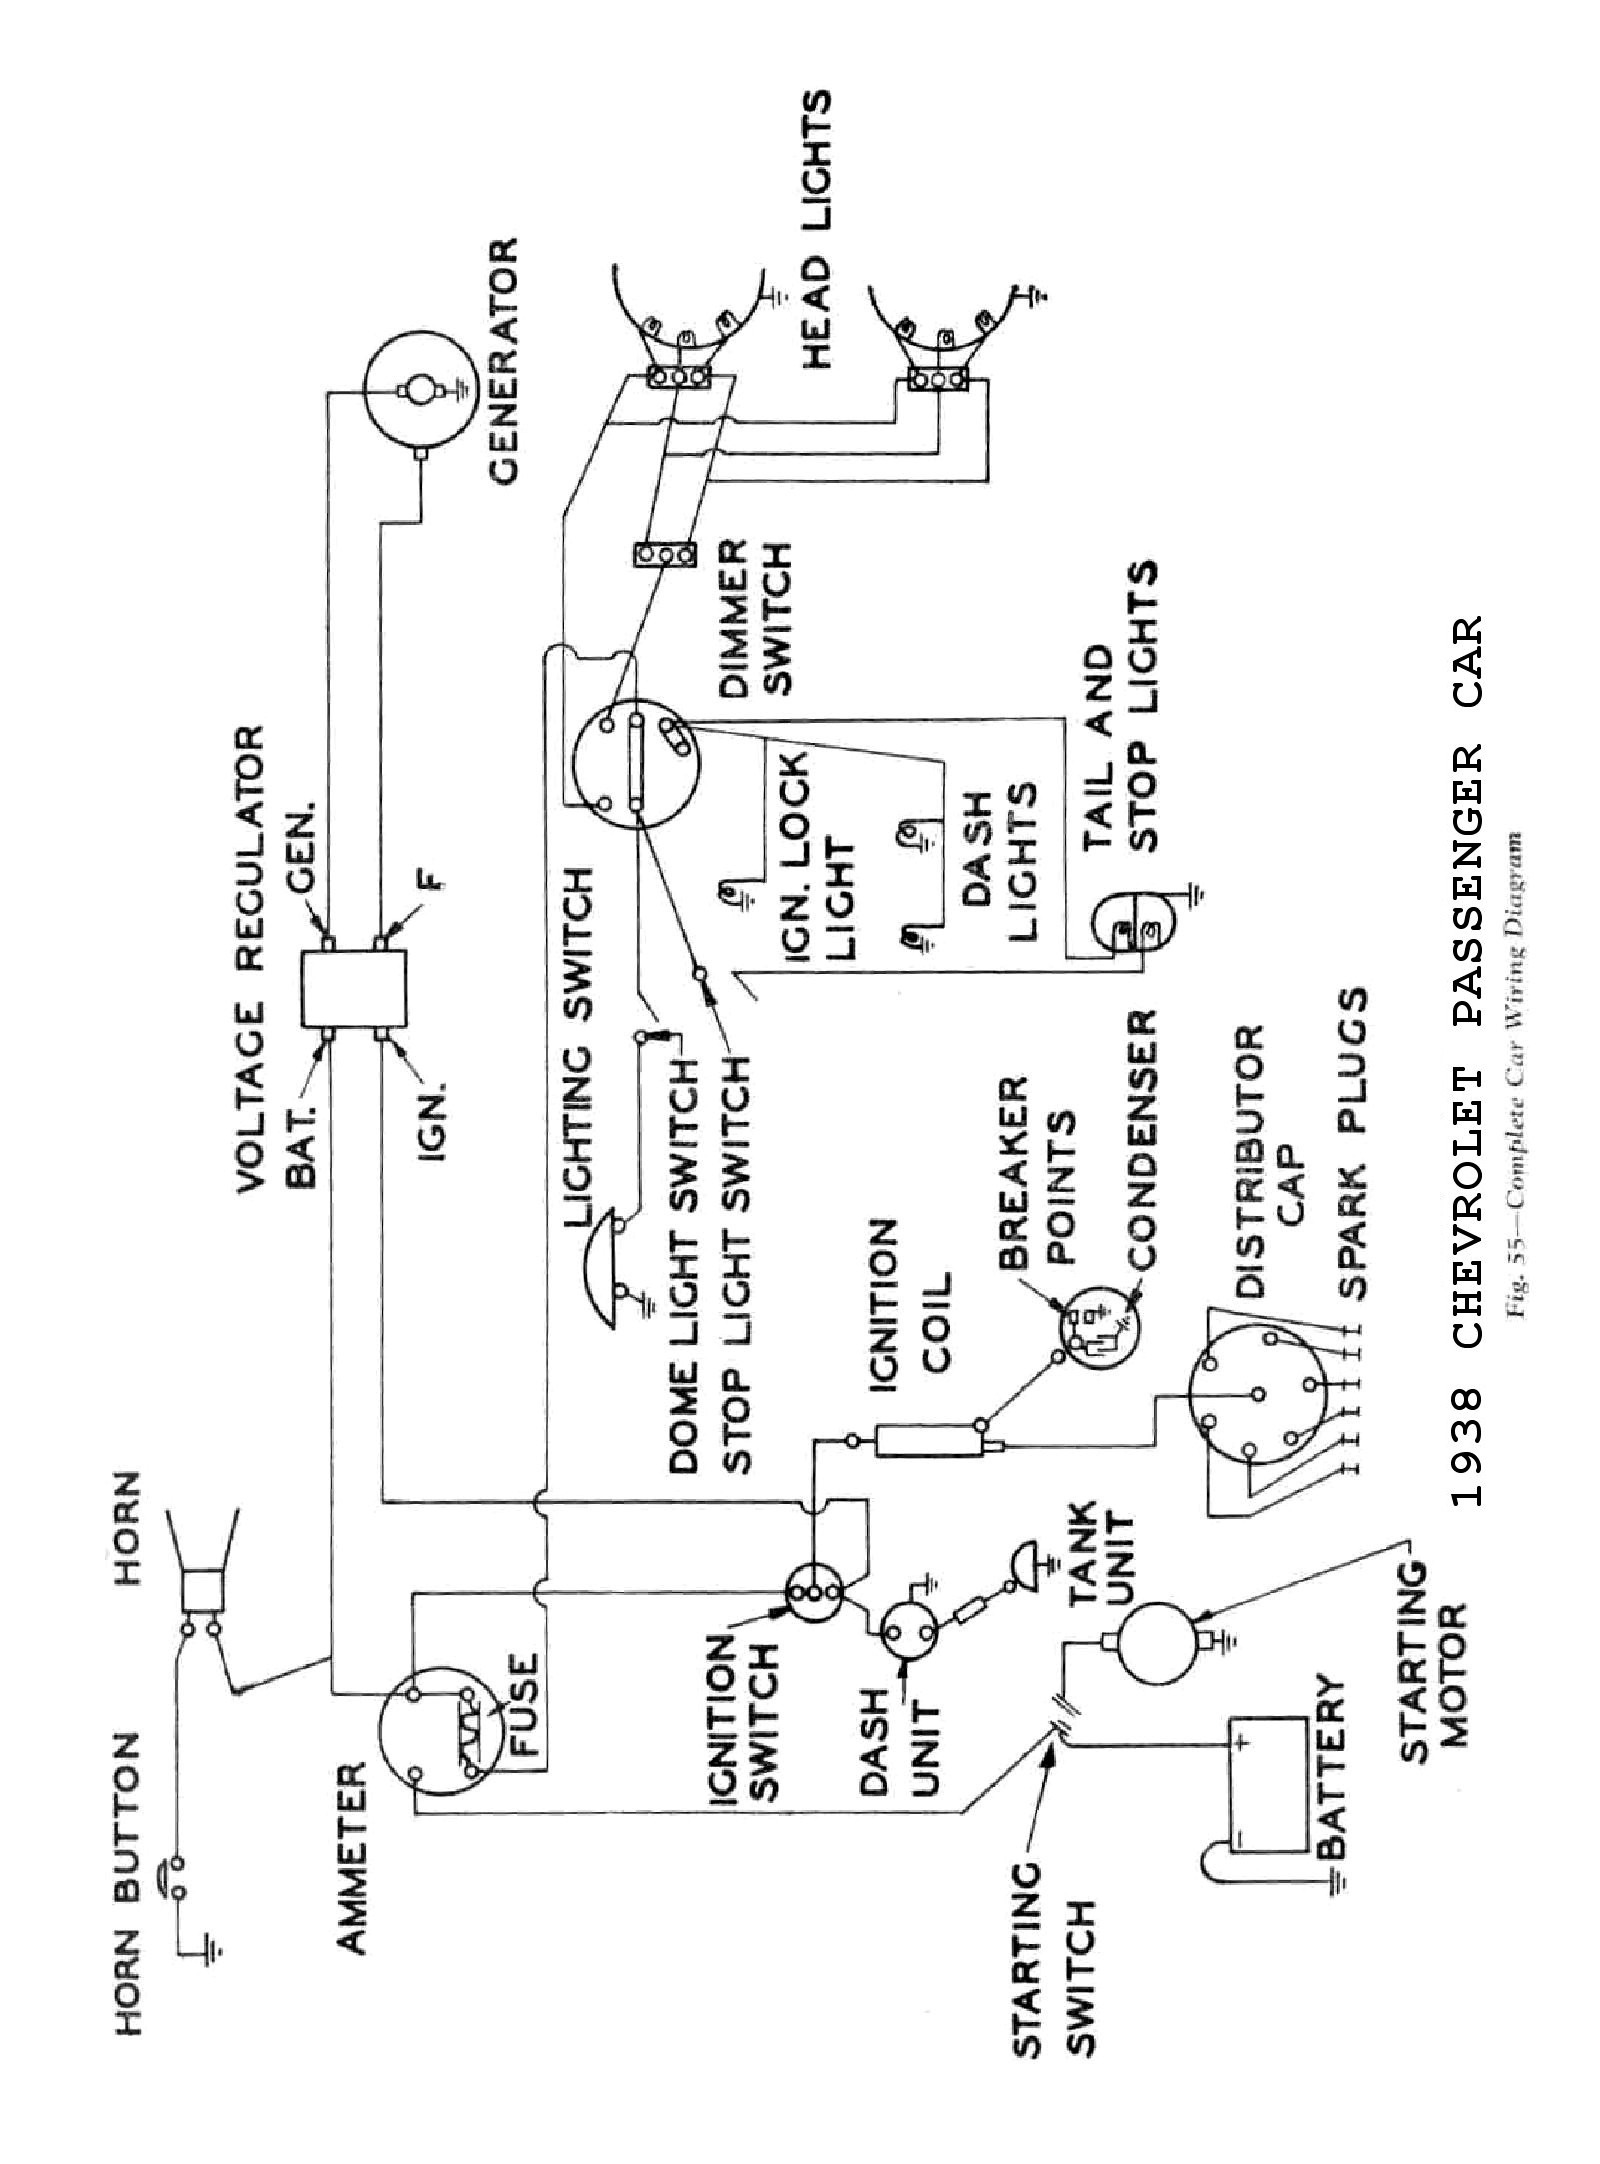 Chevy Wiring diagrams 1956 dodge wiring harness diagram 